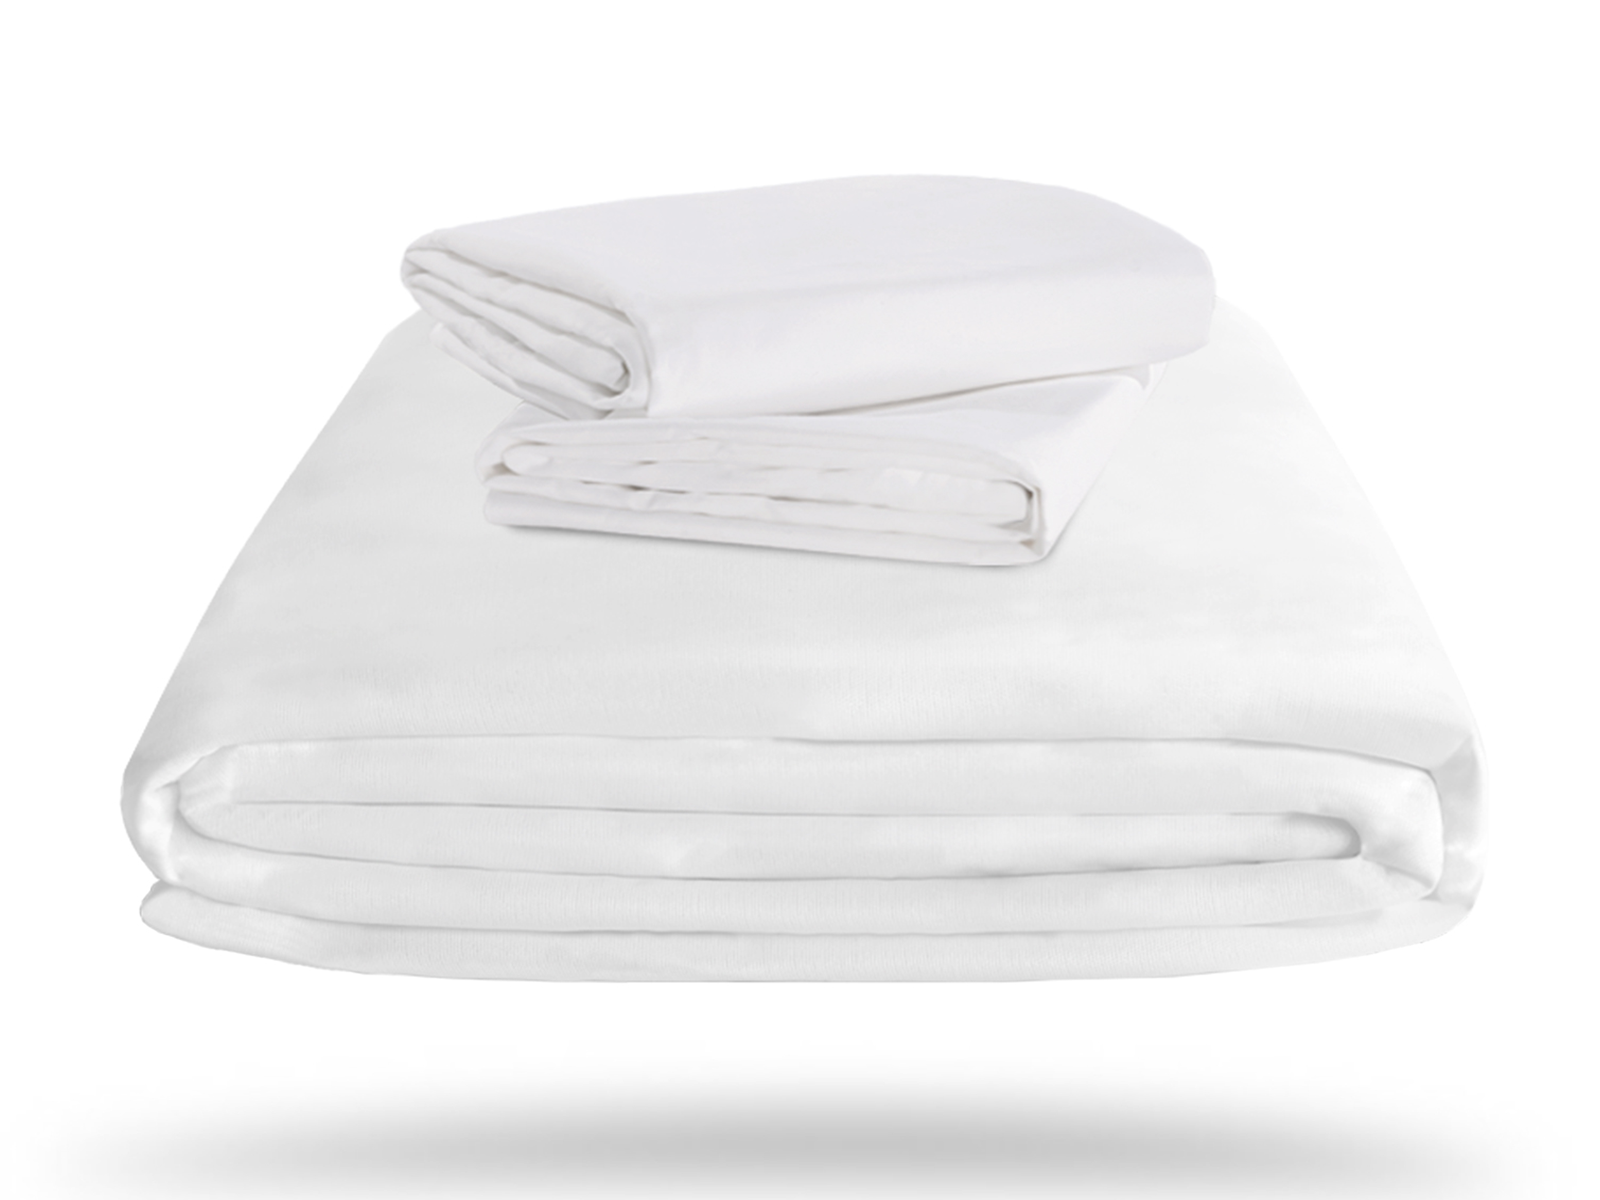 Bedgear King Germshield Mattress and Pillow Cover Set | Antimicrobial